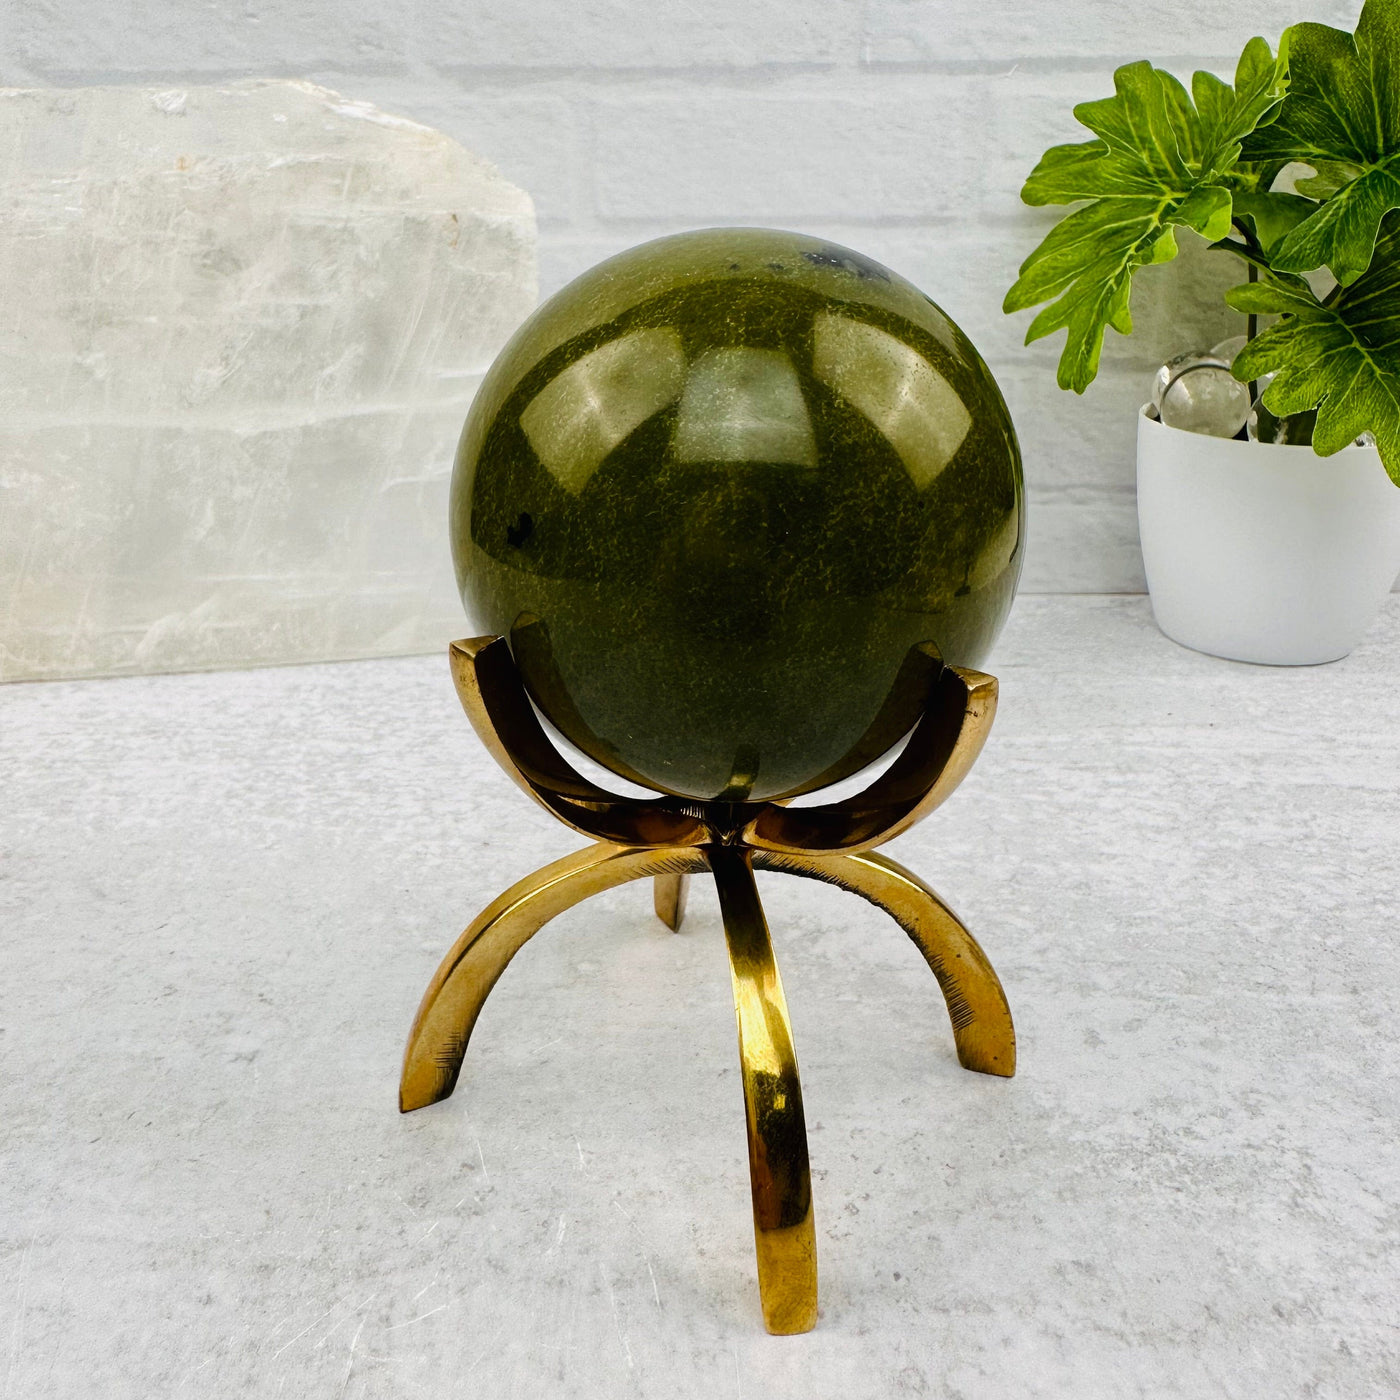 Green Jade Polished Sphere displayed as home decor 